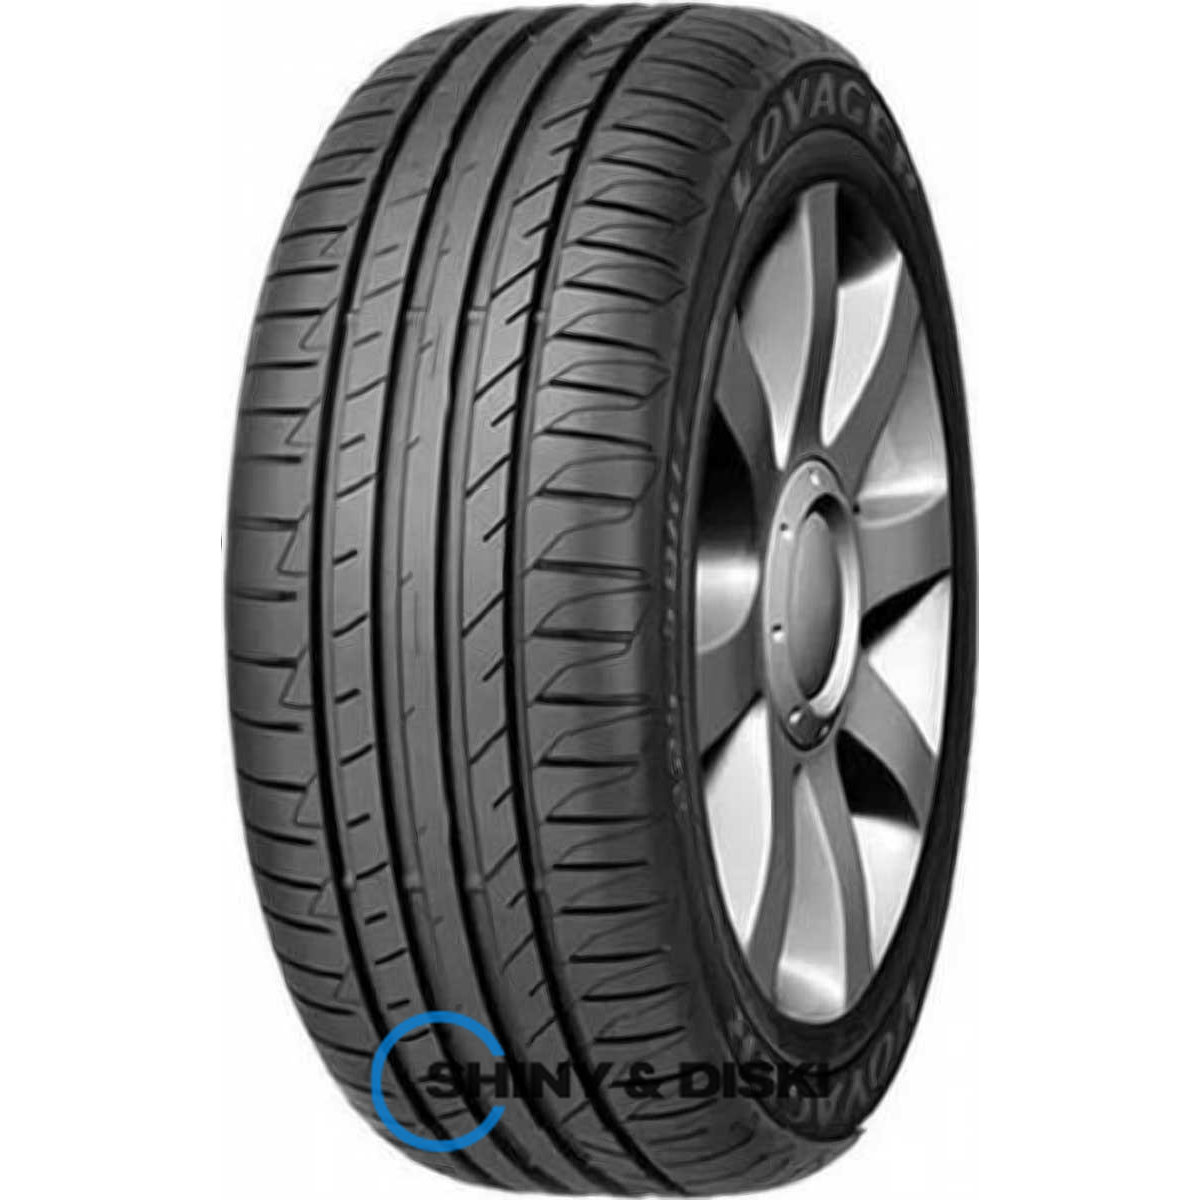 voyager summer uhp 225/50 r17 98y xl